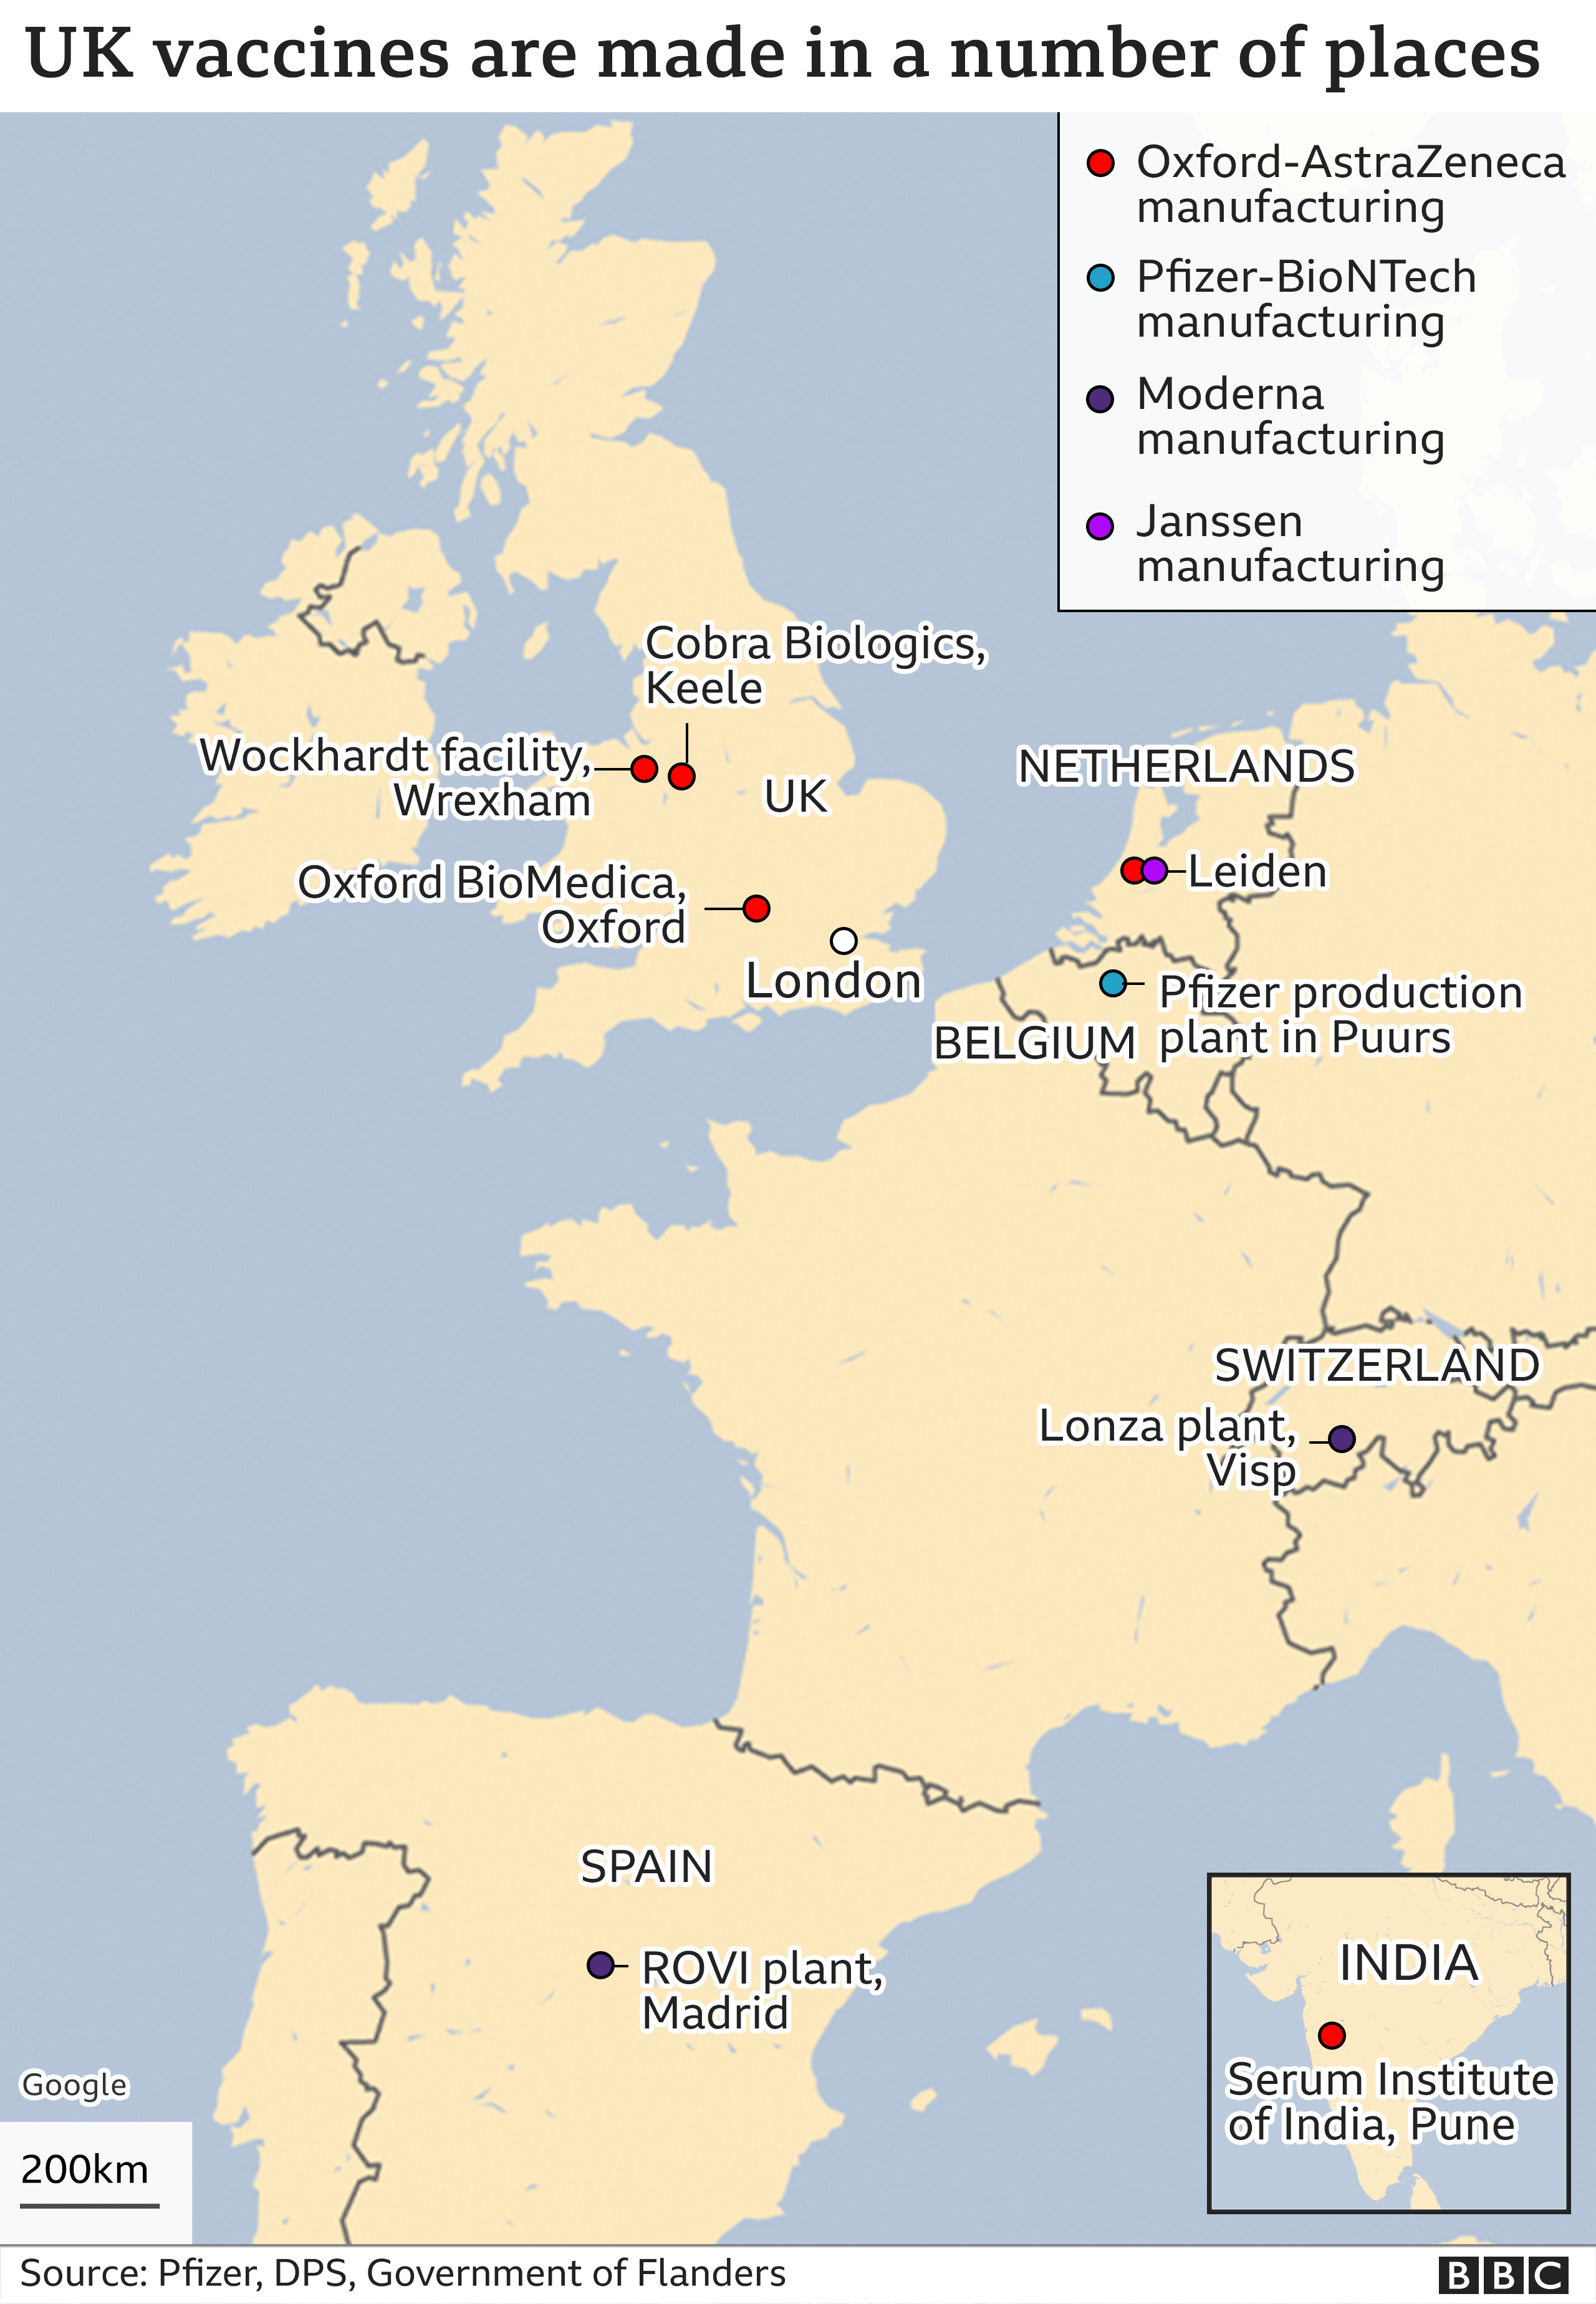 Map showing where the vaccines are made across the UK, Europe and India